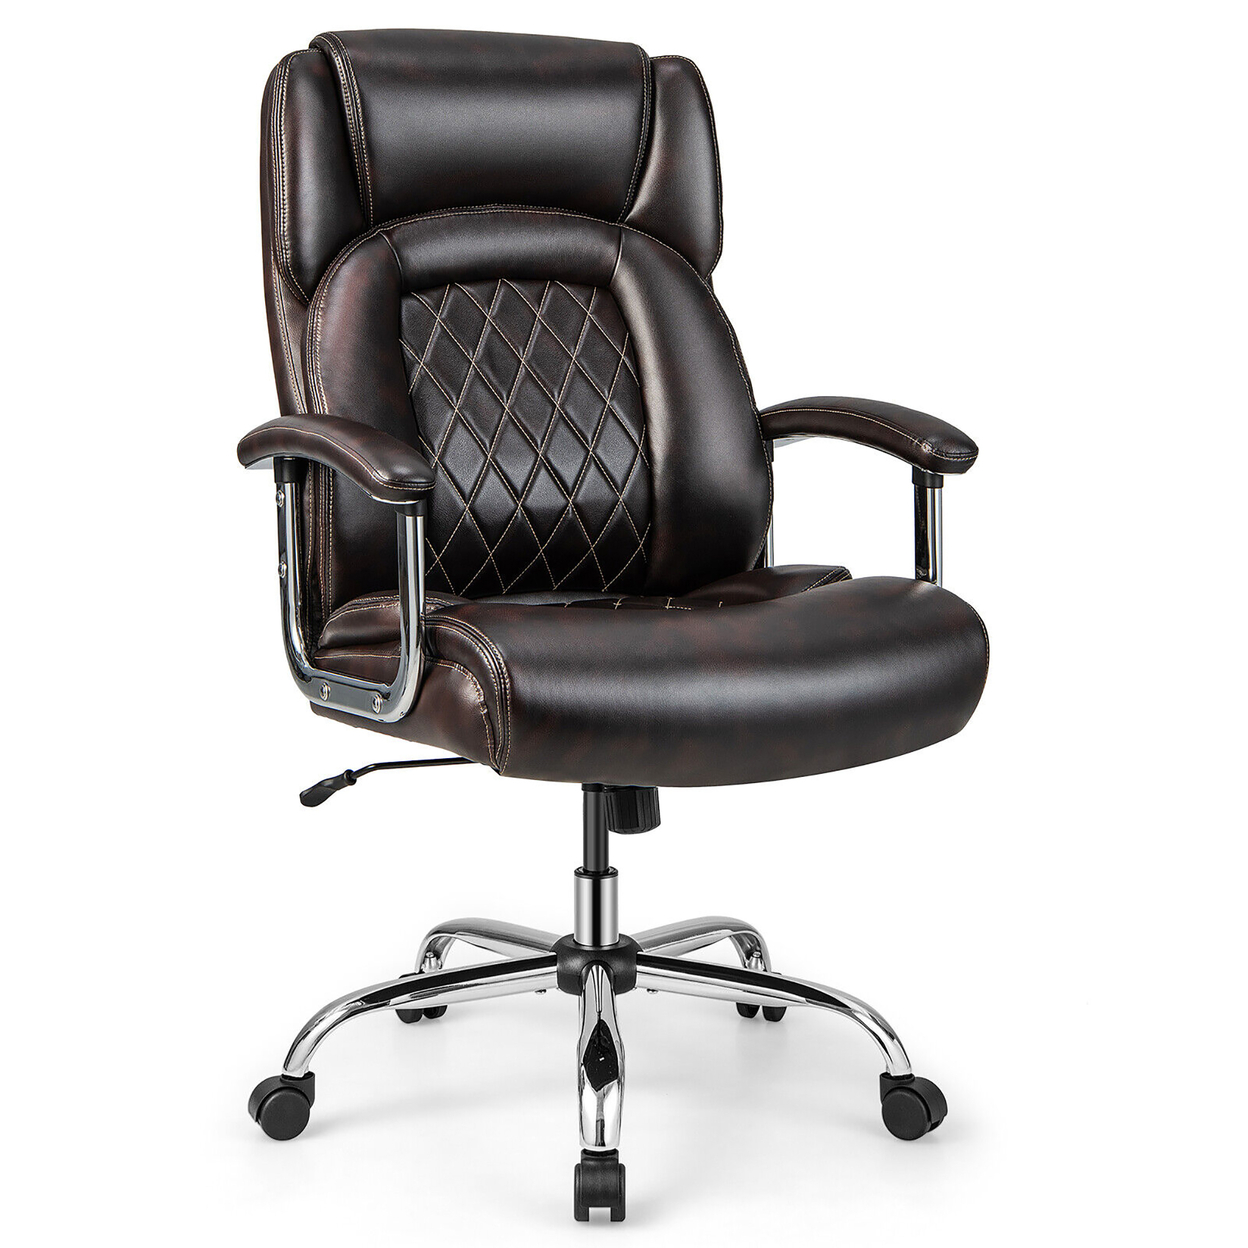 500LBS High Back Big & Tall Office Chair Adjustable Leather Task Chair Brown